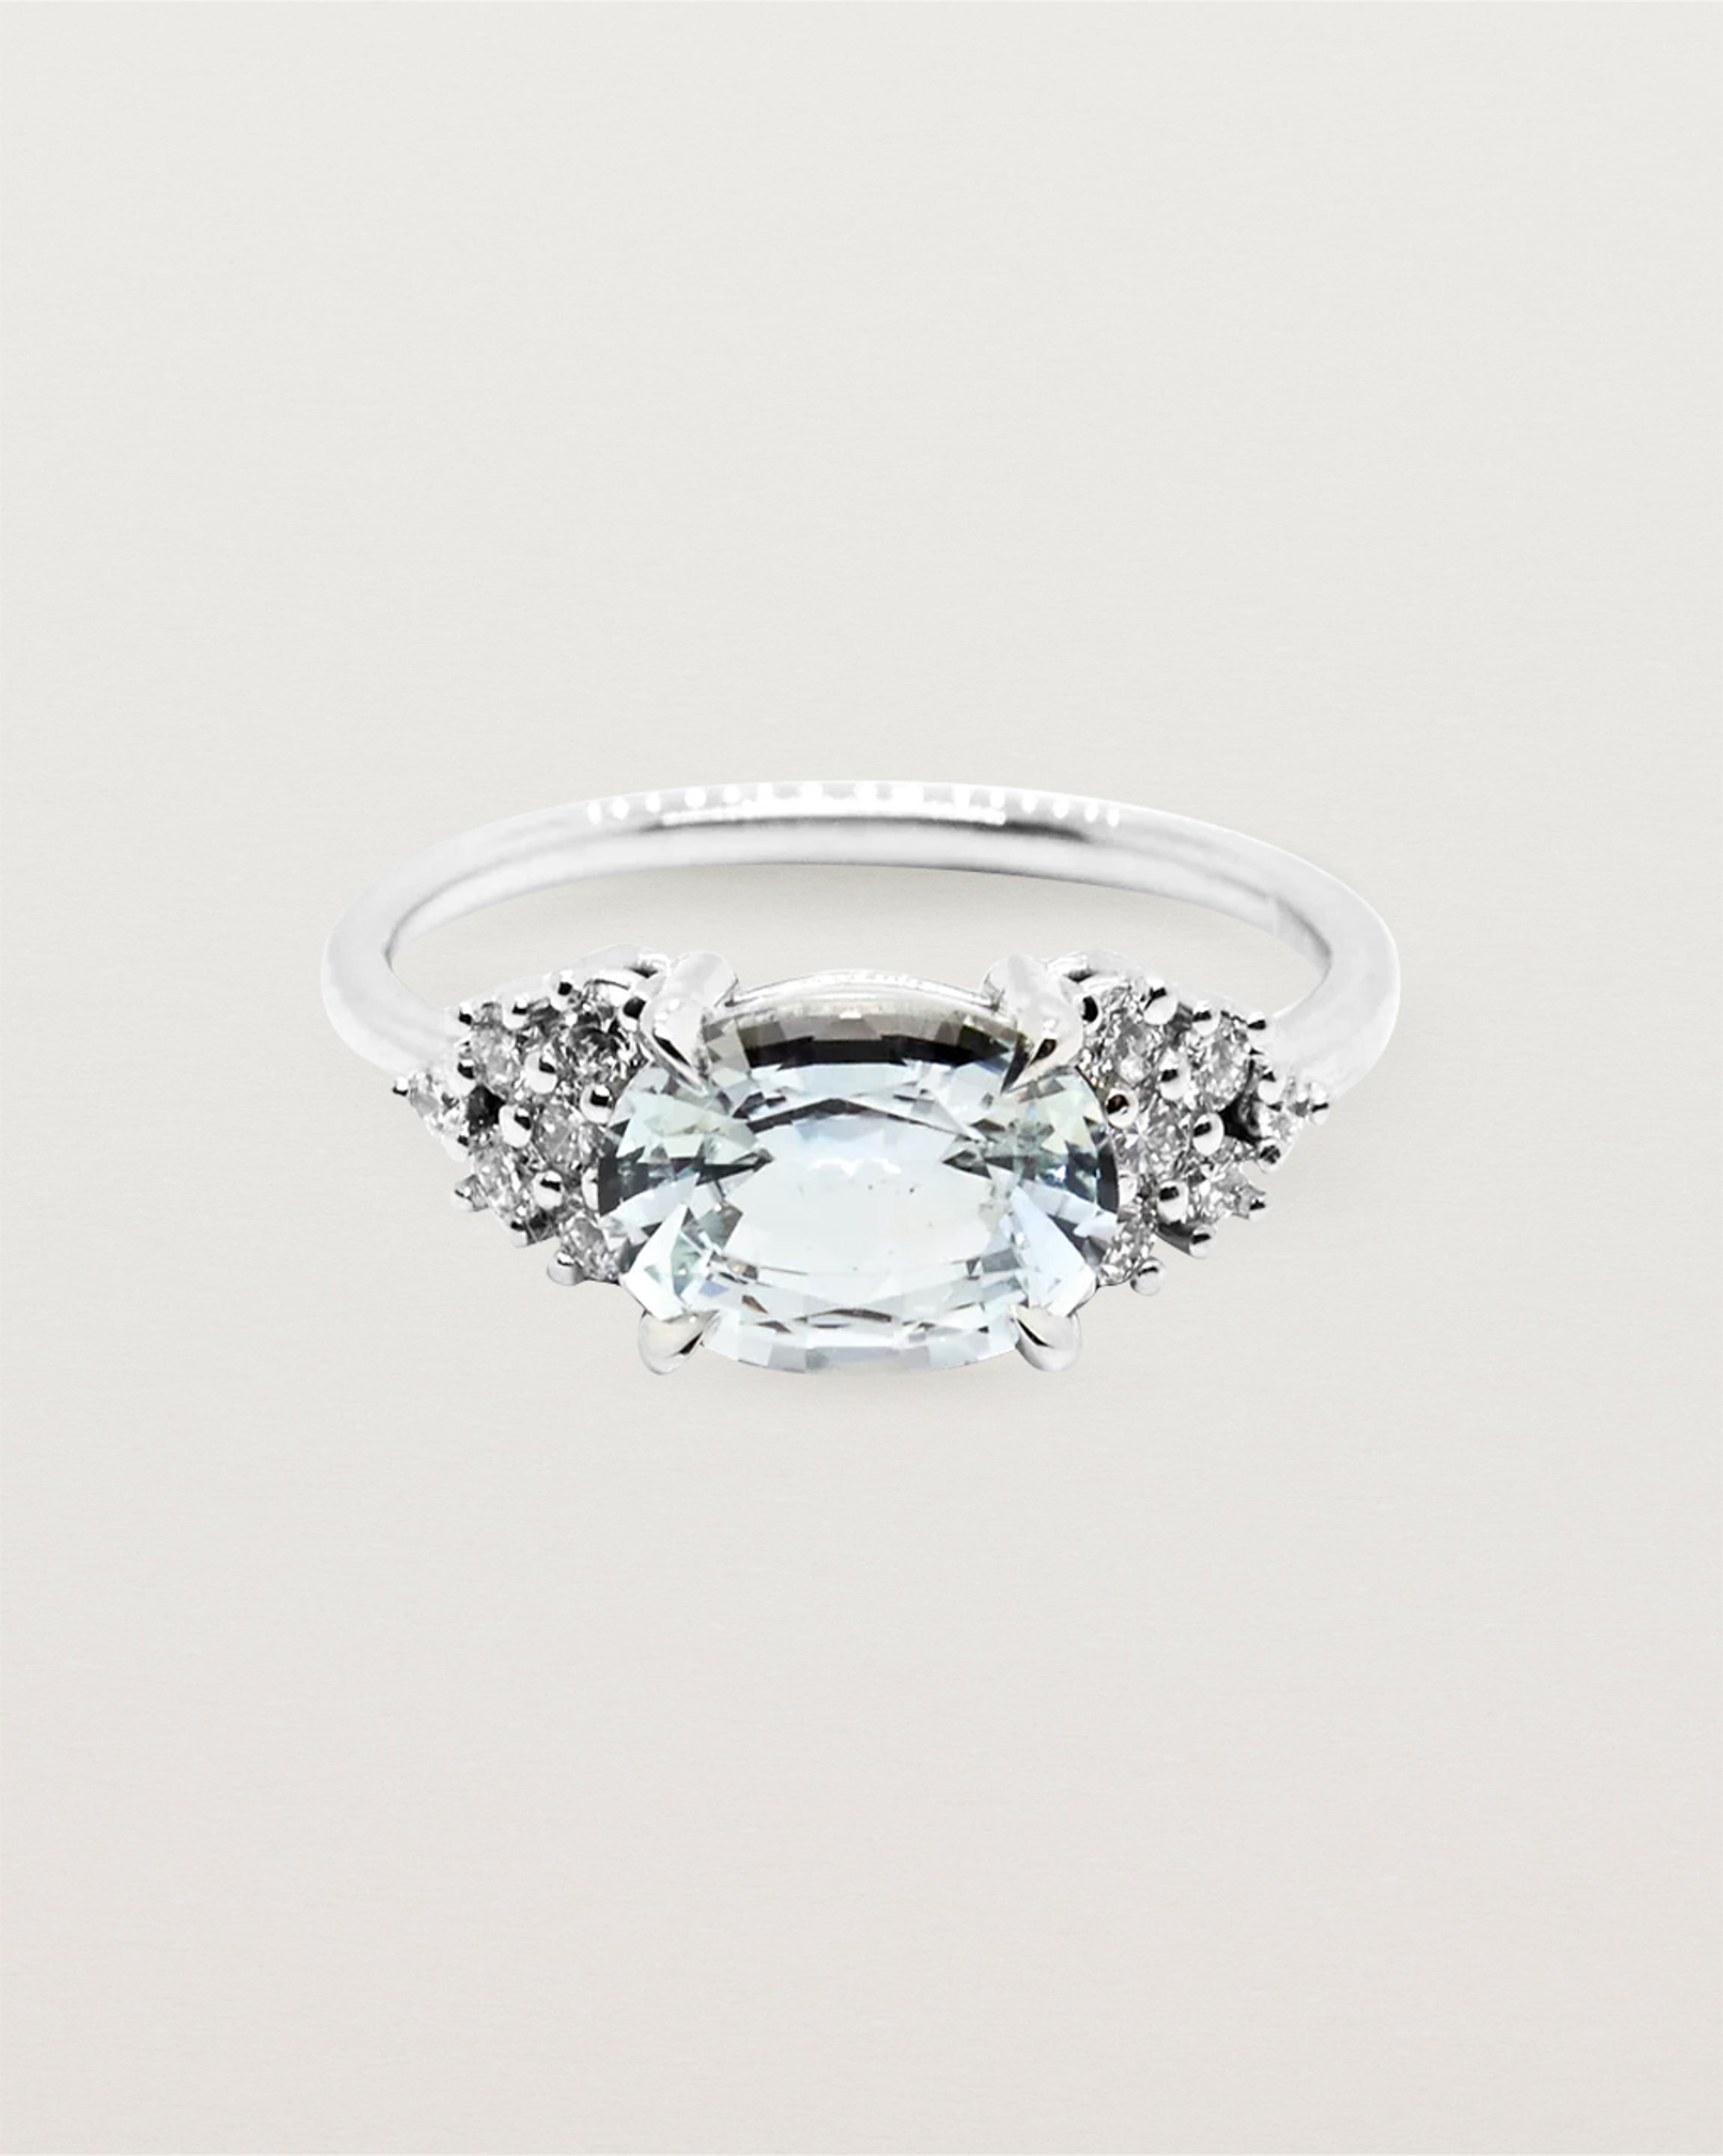 A white oval sapphire set east to west, adorned with clusters of white diamonds either side, and crafted in white gold